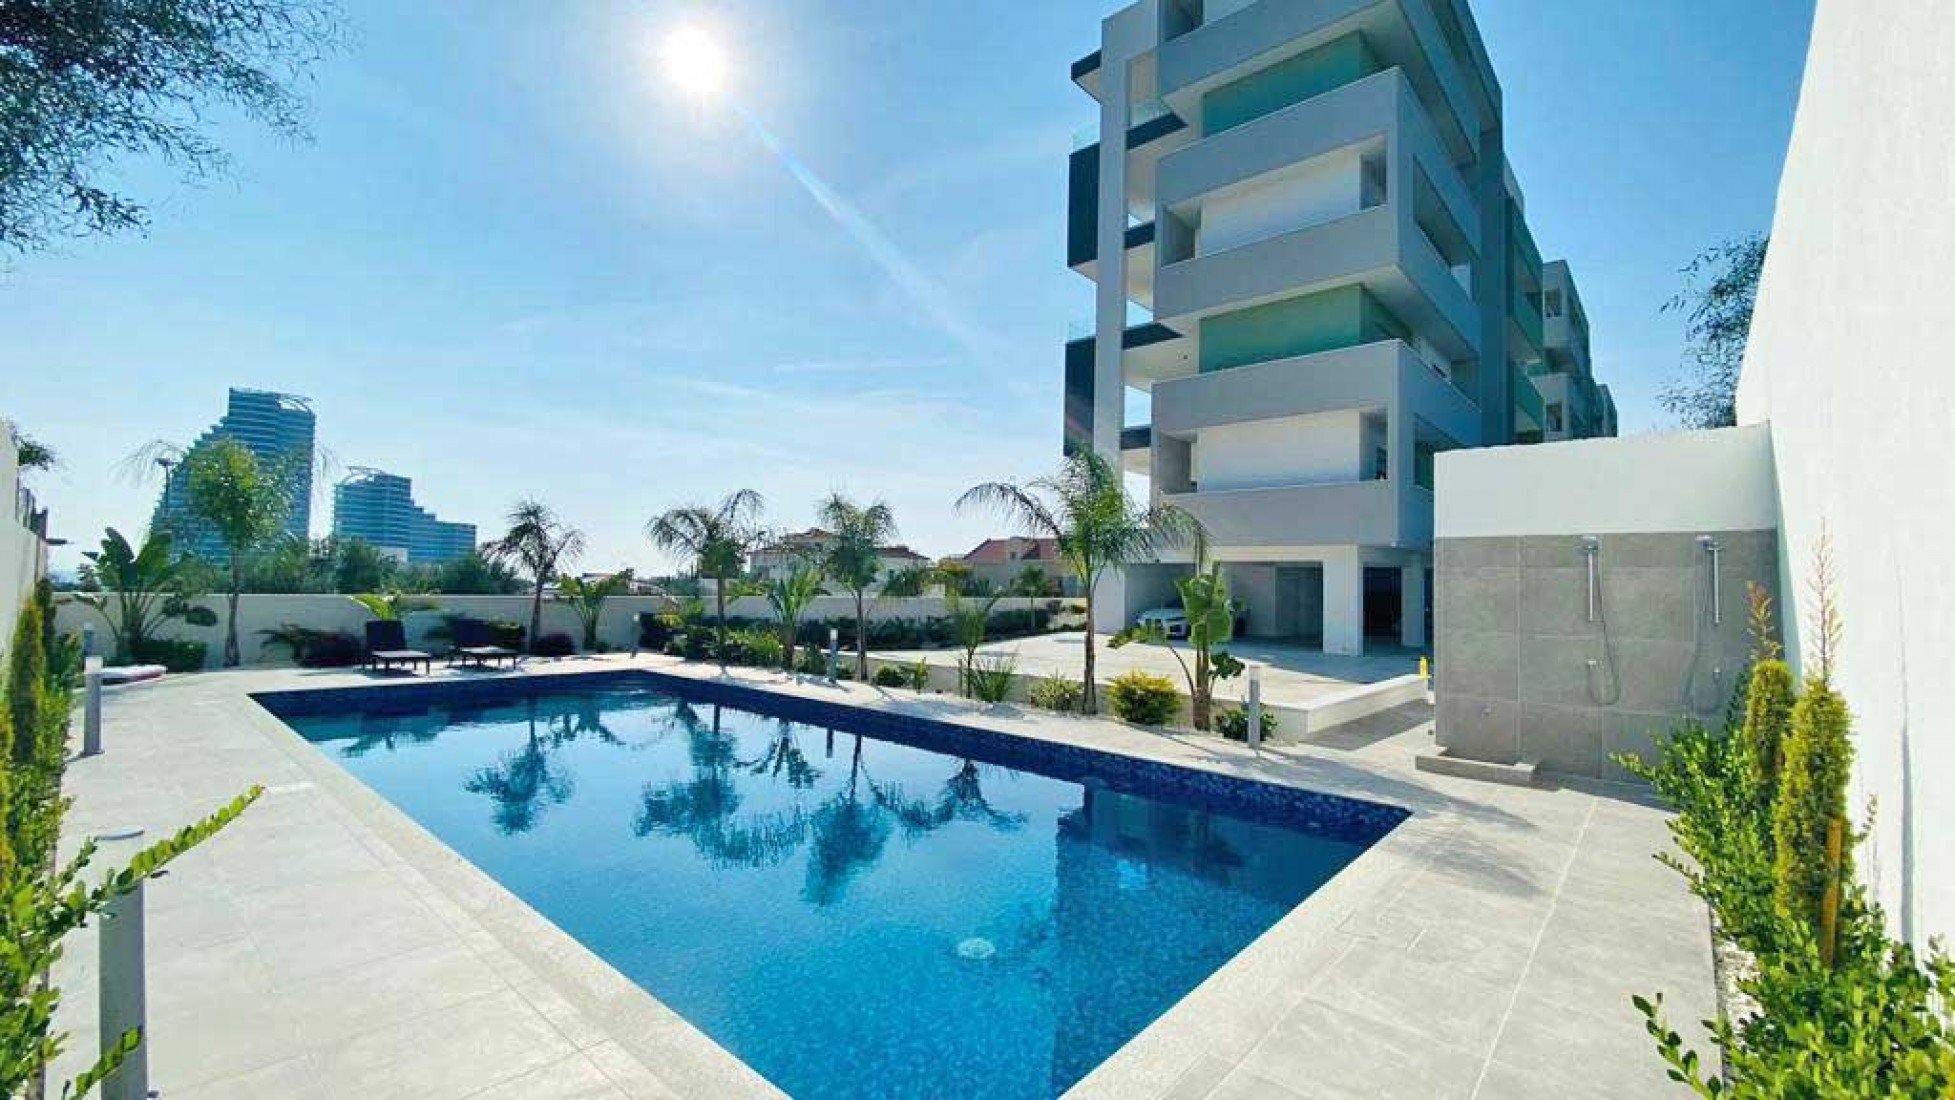 House for sale in Limassol, Cyprus 4205409405